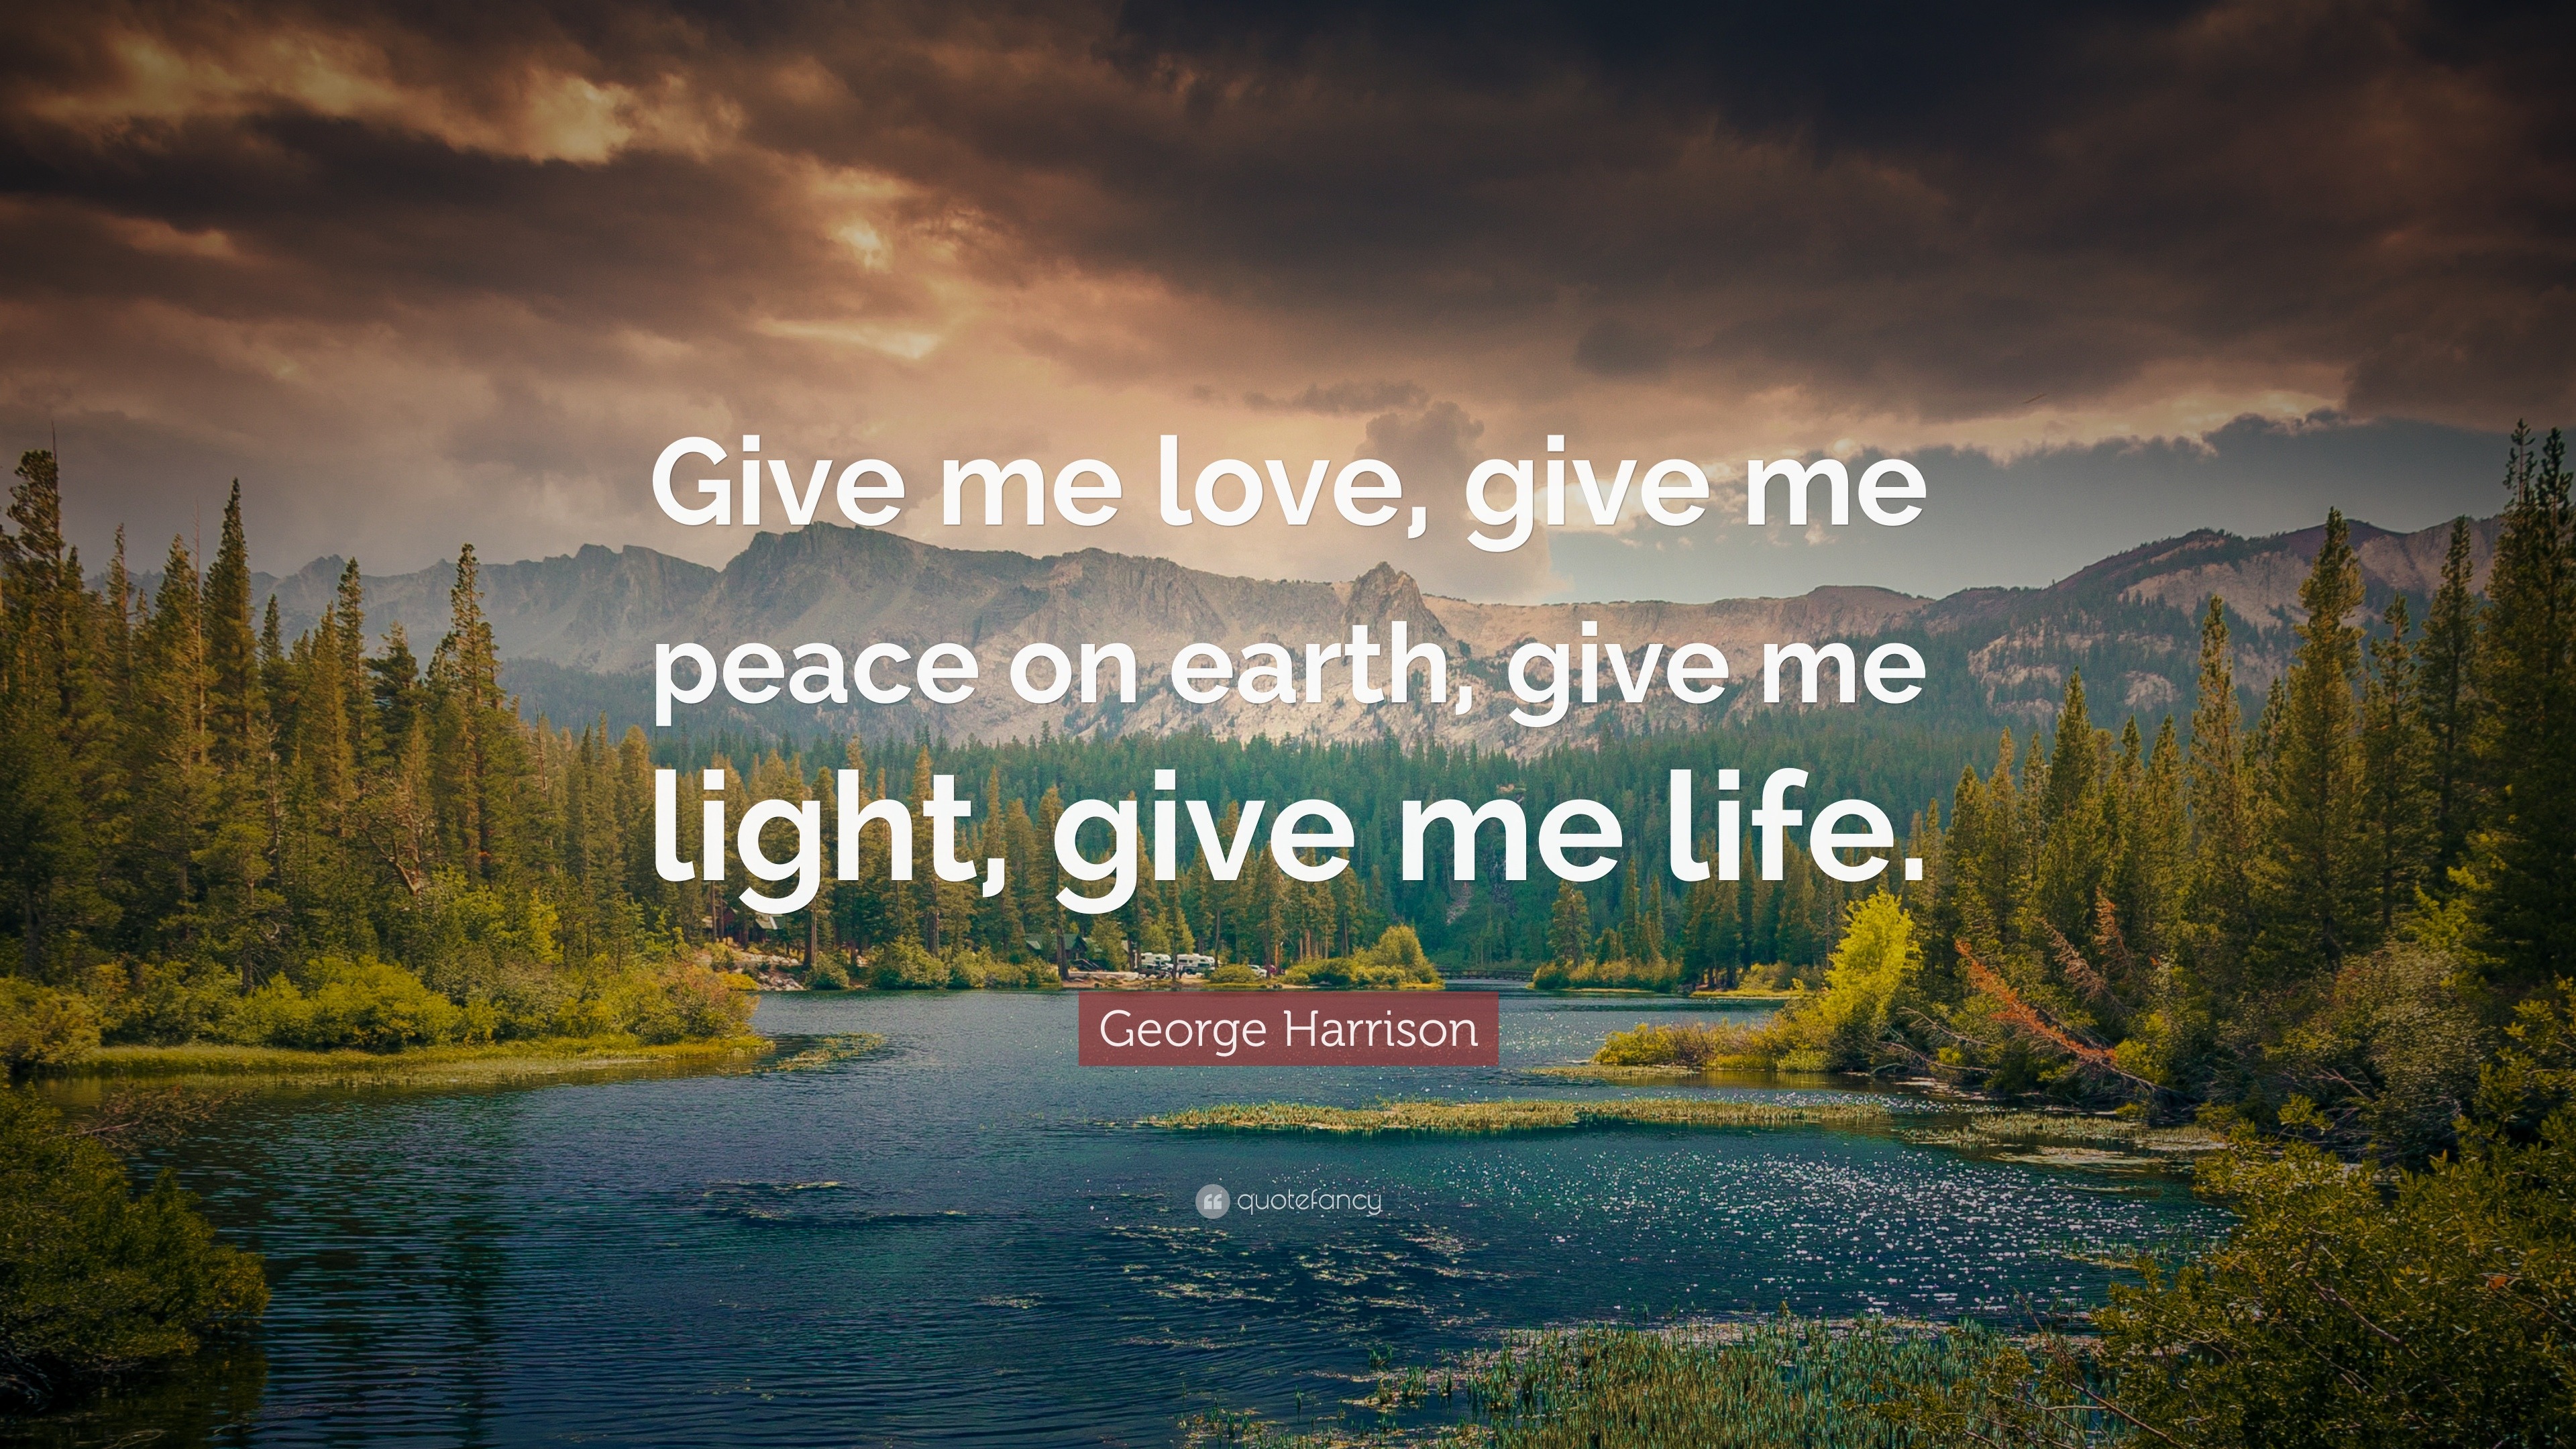 George Harrison Quote: “Give me love, give me peace on earth, give me